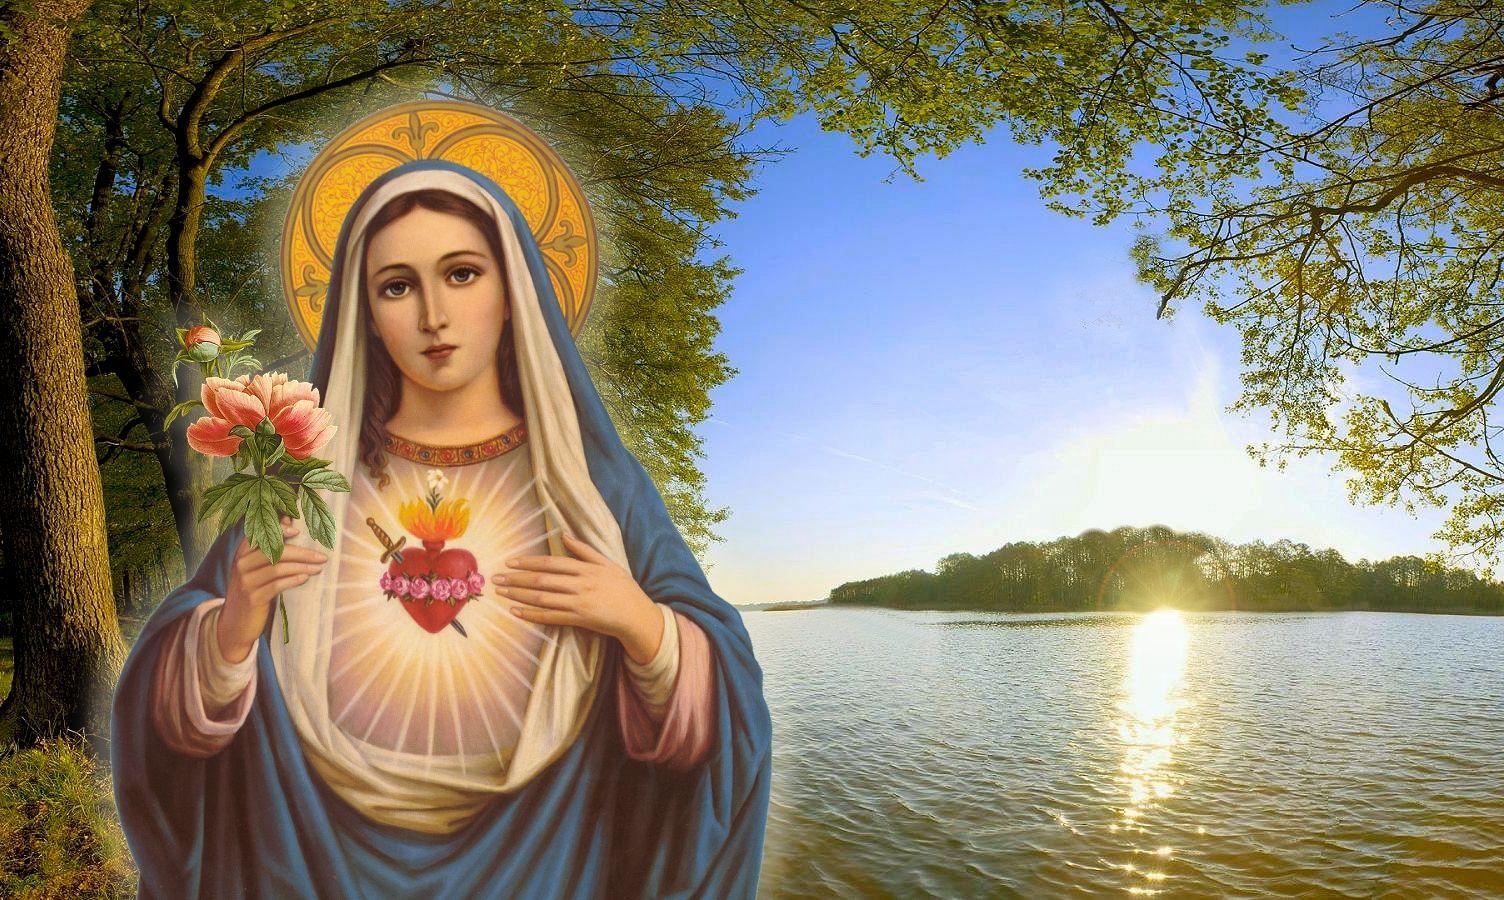 PRAYER TO THE IMMACULATE HEART